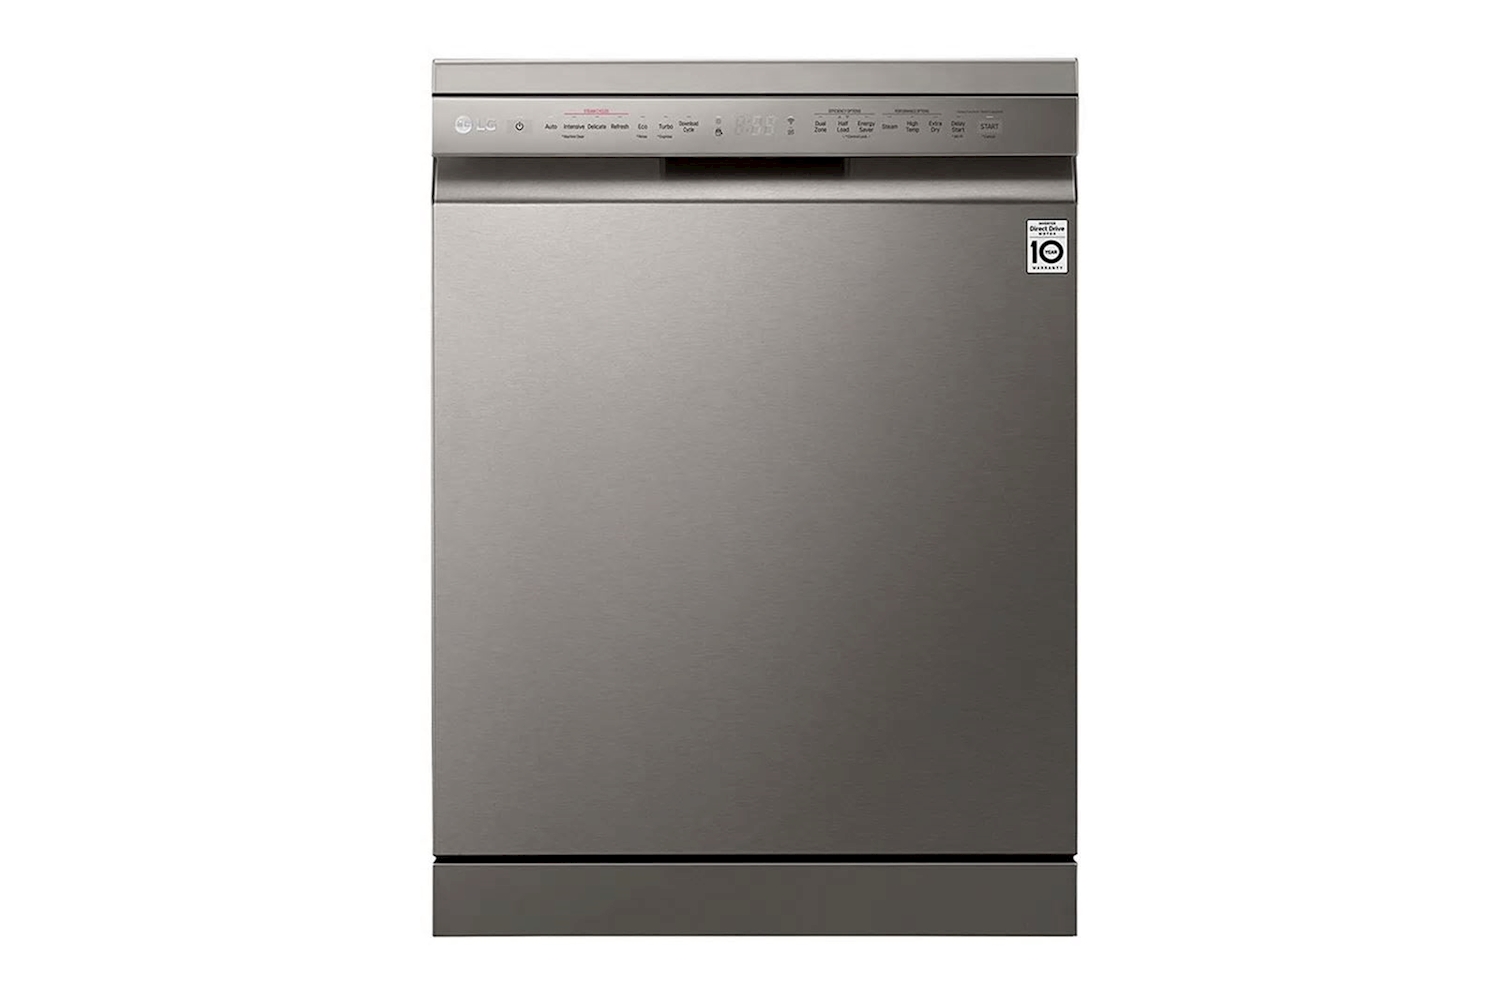 LG Dishwasher A++, 14 Place Settings, 9L , 10 Wash Cycles, Stainless Steel, DFB425FP